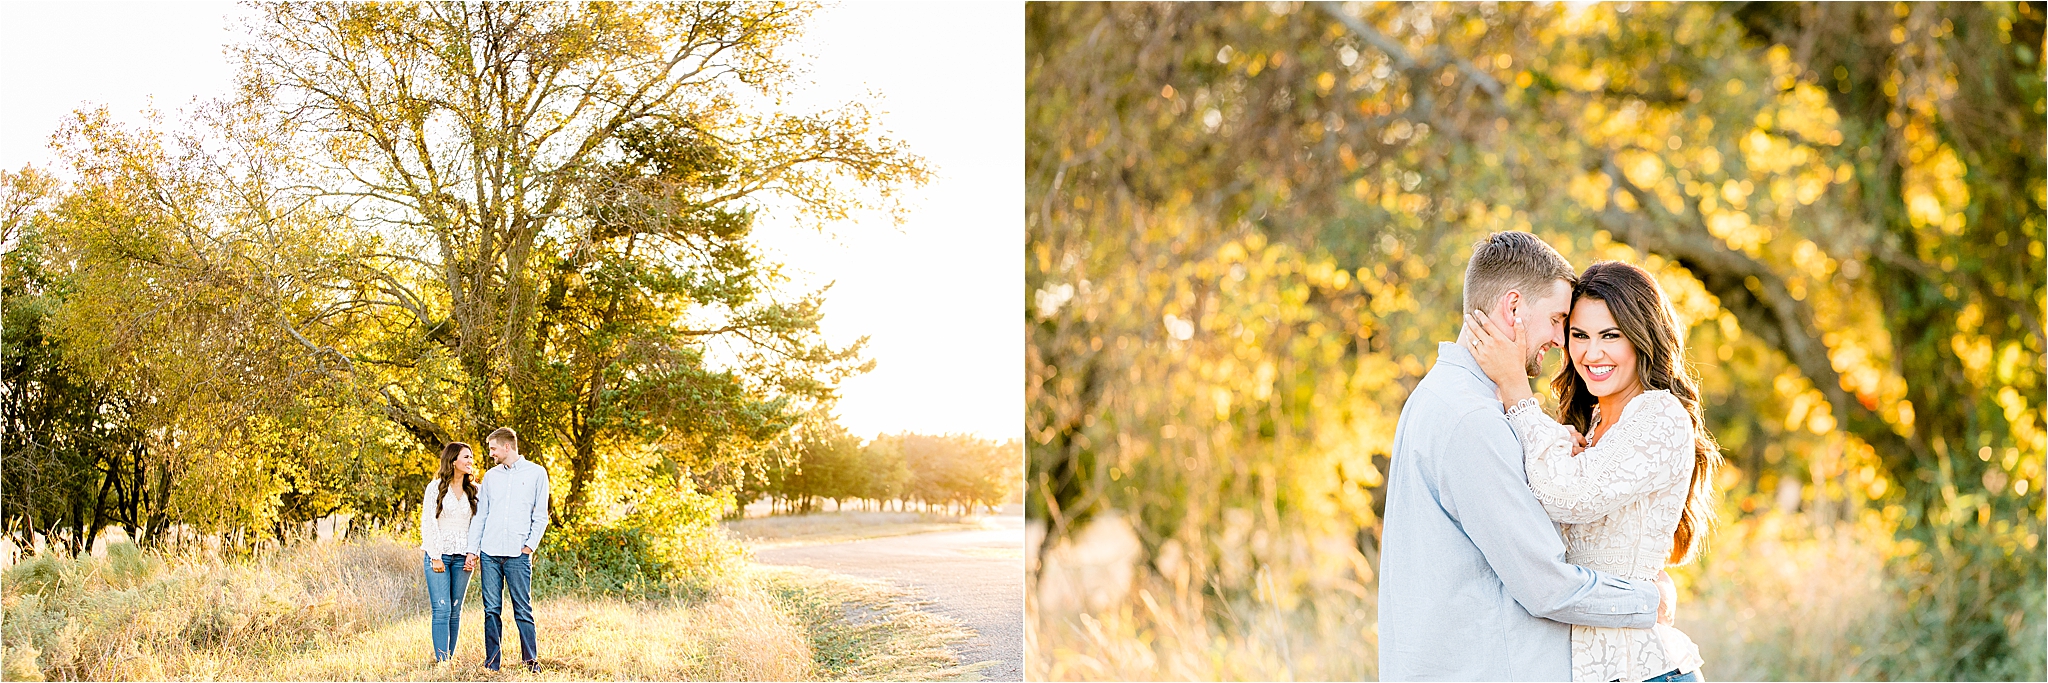 An engaged couple embraces in a golden field at sunset for their Fall Engagement Session in McKinney, Texas